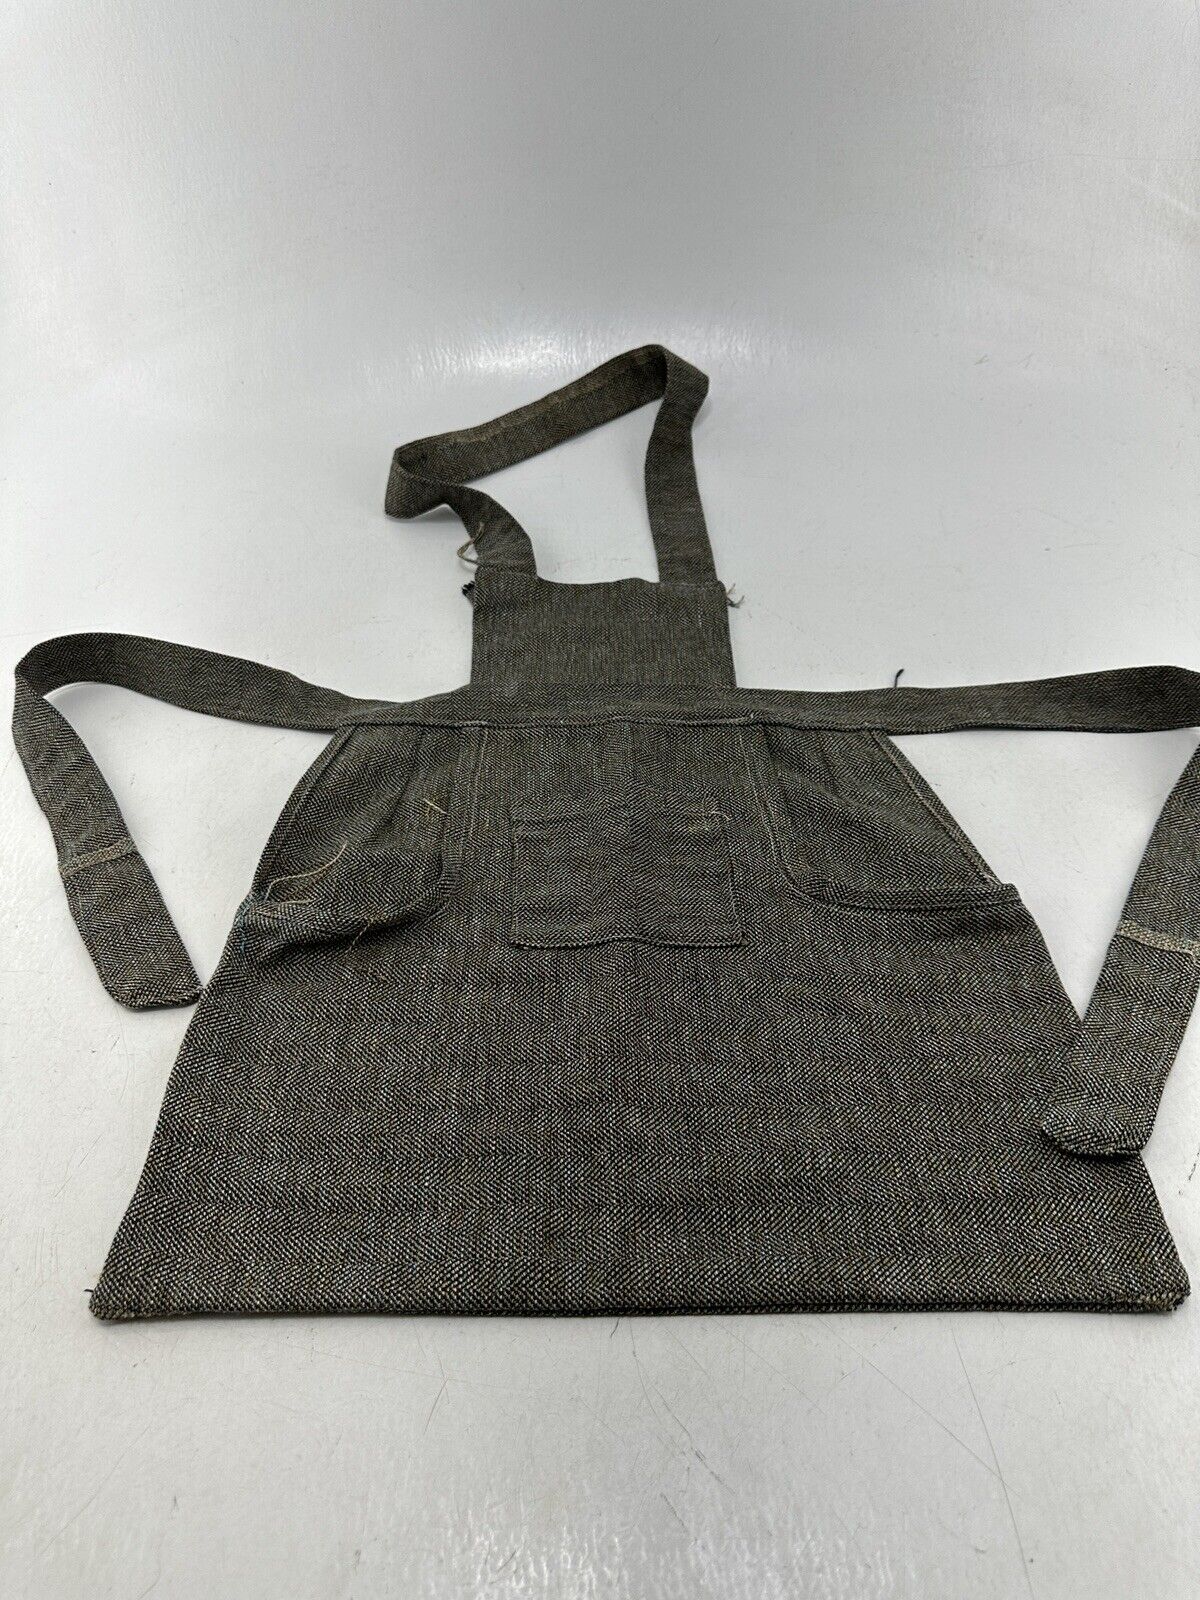 Vintage Child's Apron Brown with Pockets HandMade